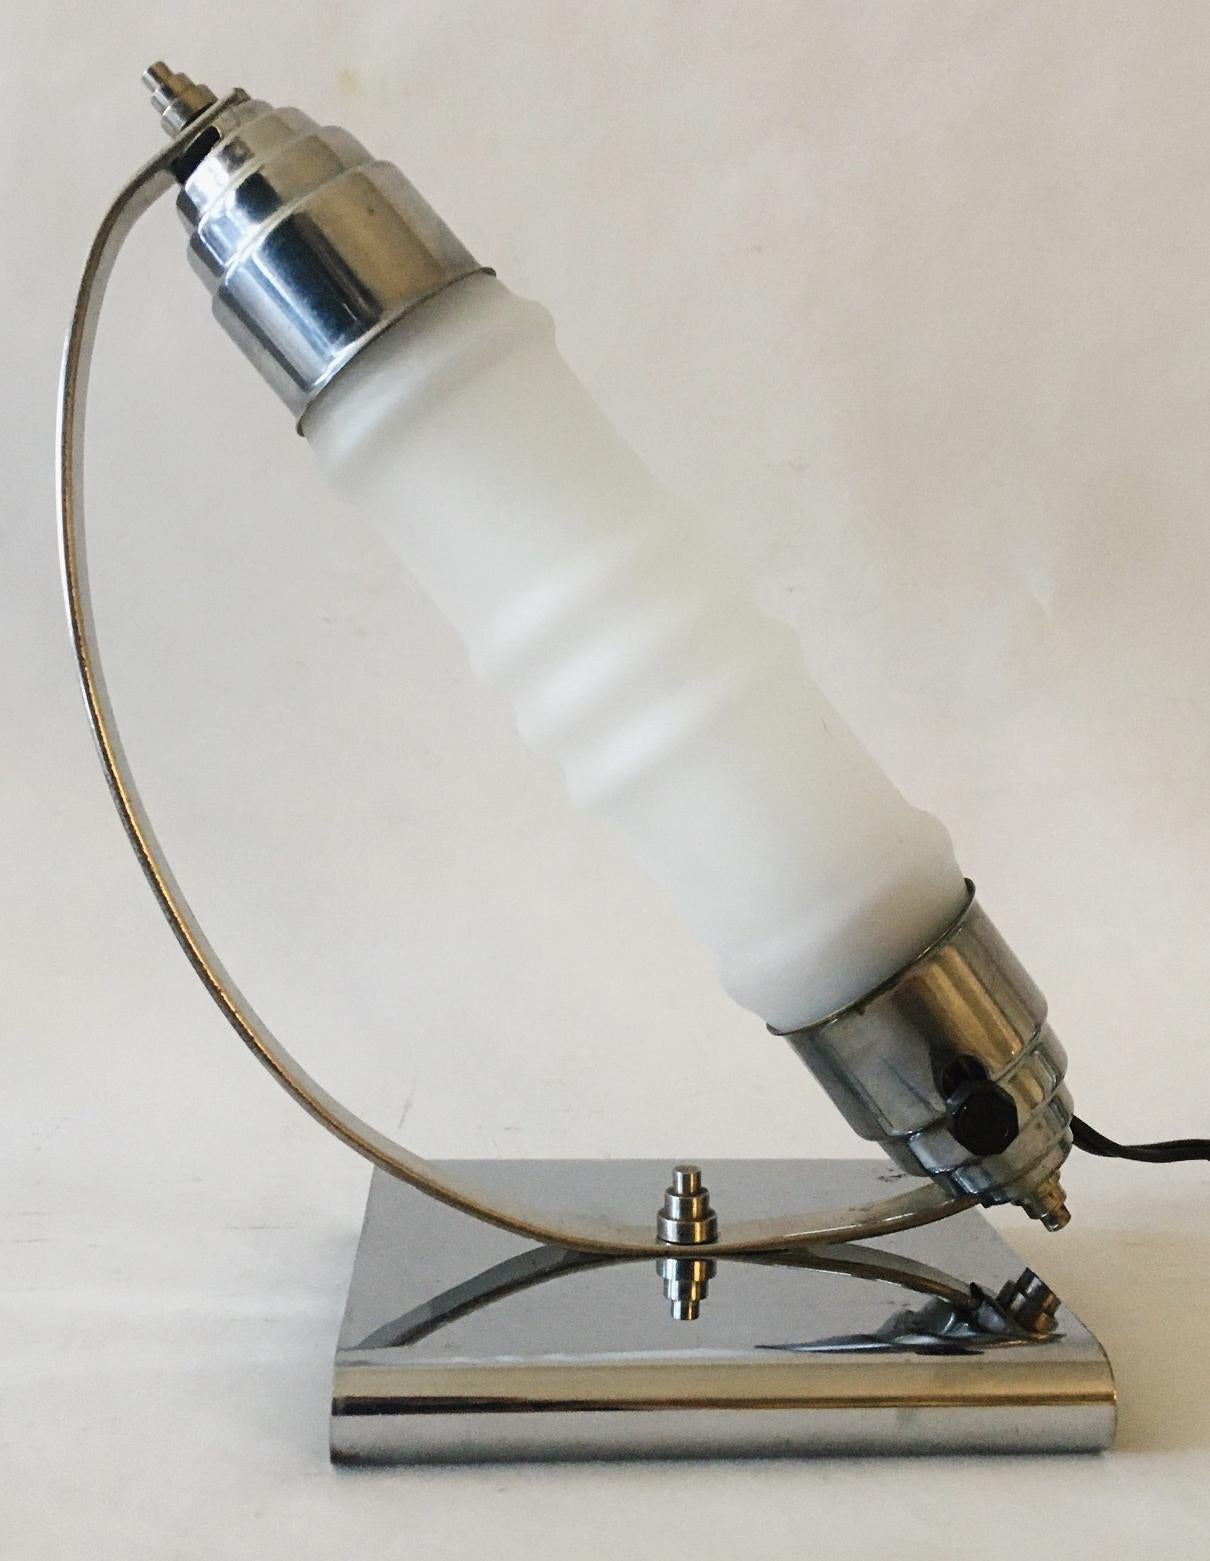 This Canadian Art Deco chrome and frosted glass table lamp was manufactured by the Florentine Lamp Company of Toronto, Ontario, Canada which ceased production in 1940 after the principal was interned by the Canadian government as an enemy alien. The